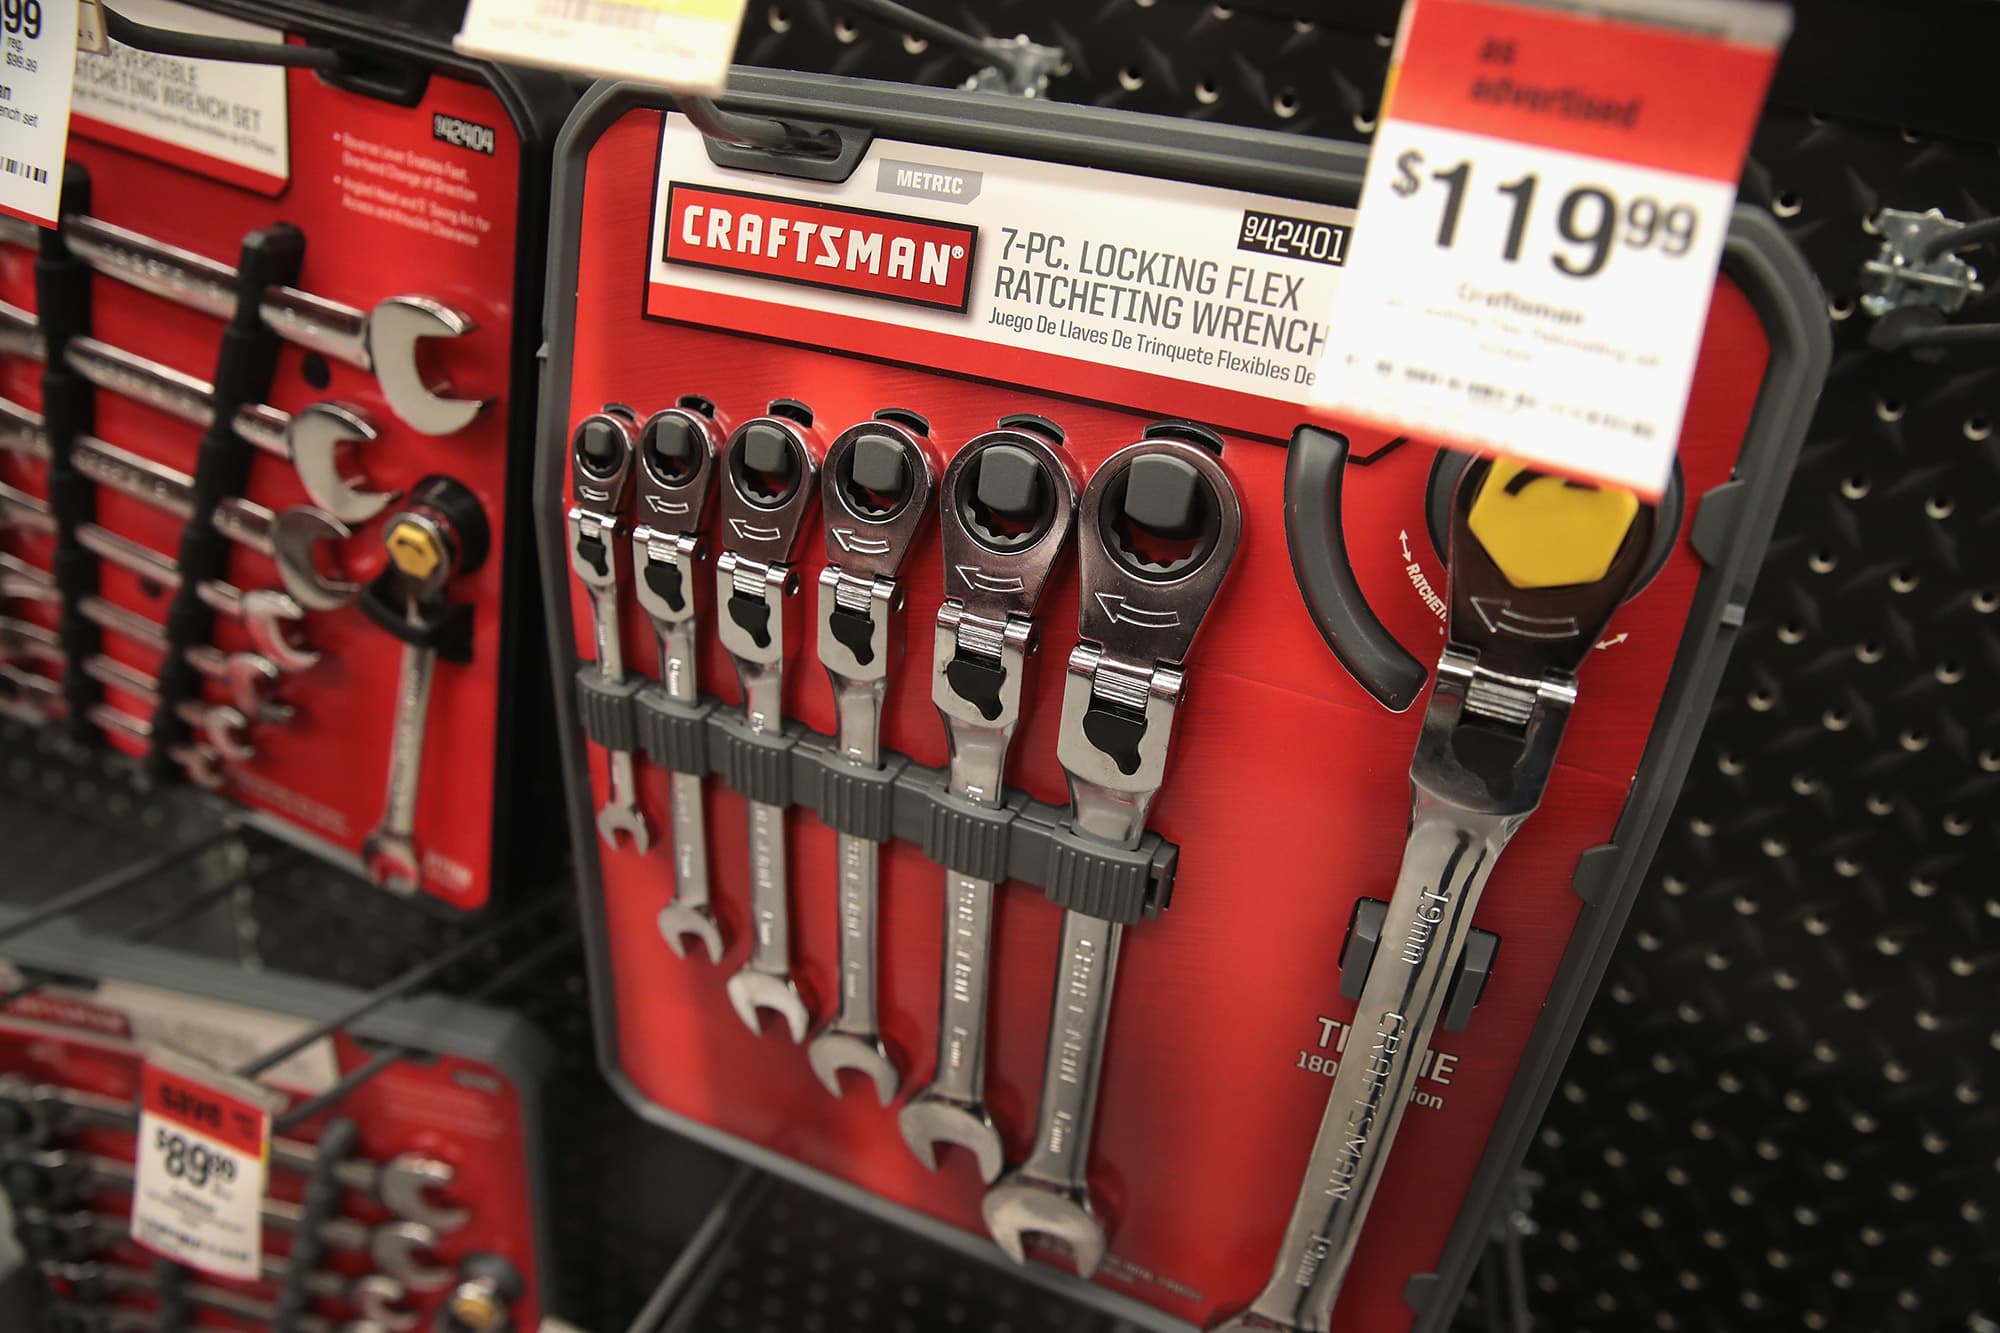 Stanley Black & Decker CEO: Taking Craftsman From Sad Shape to Made in  America - TheStreet